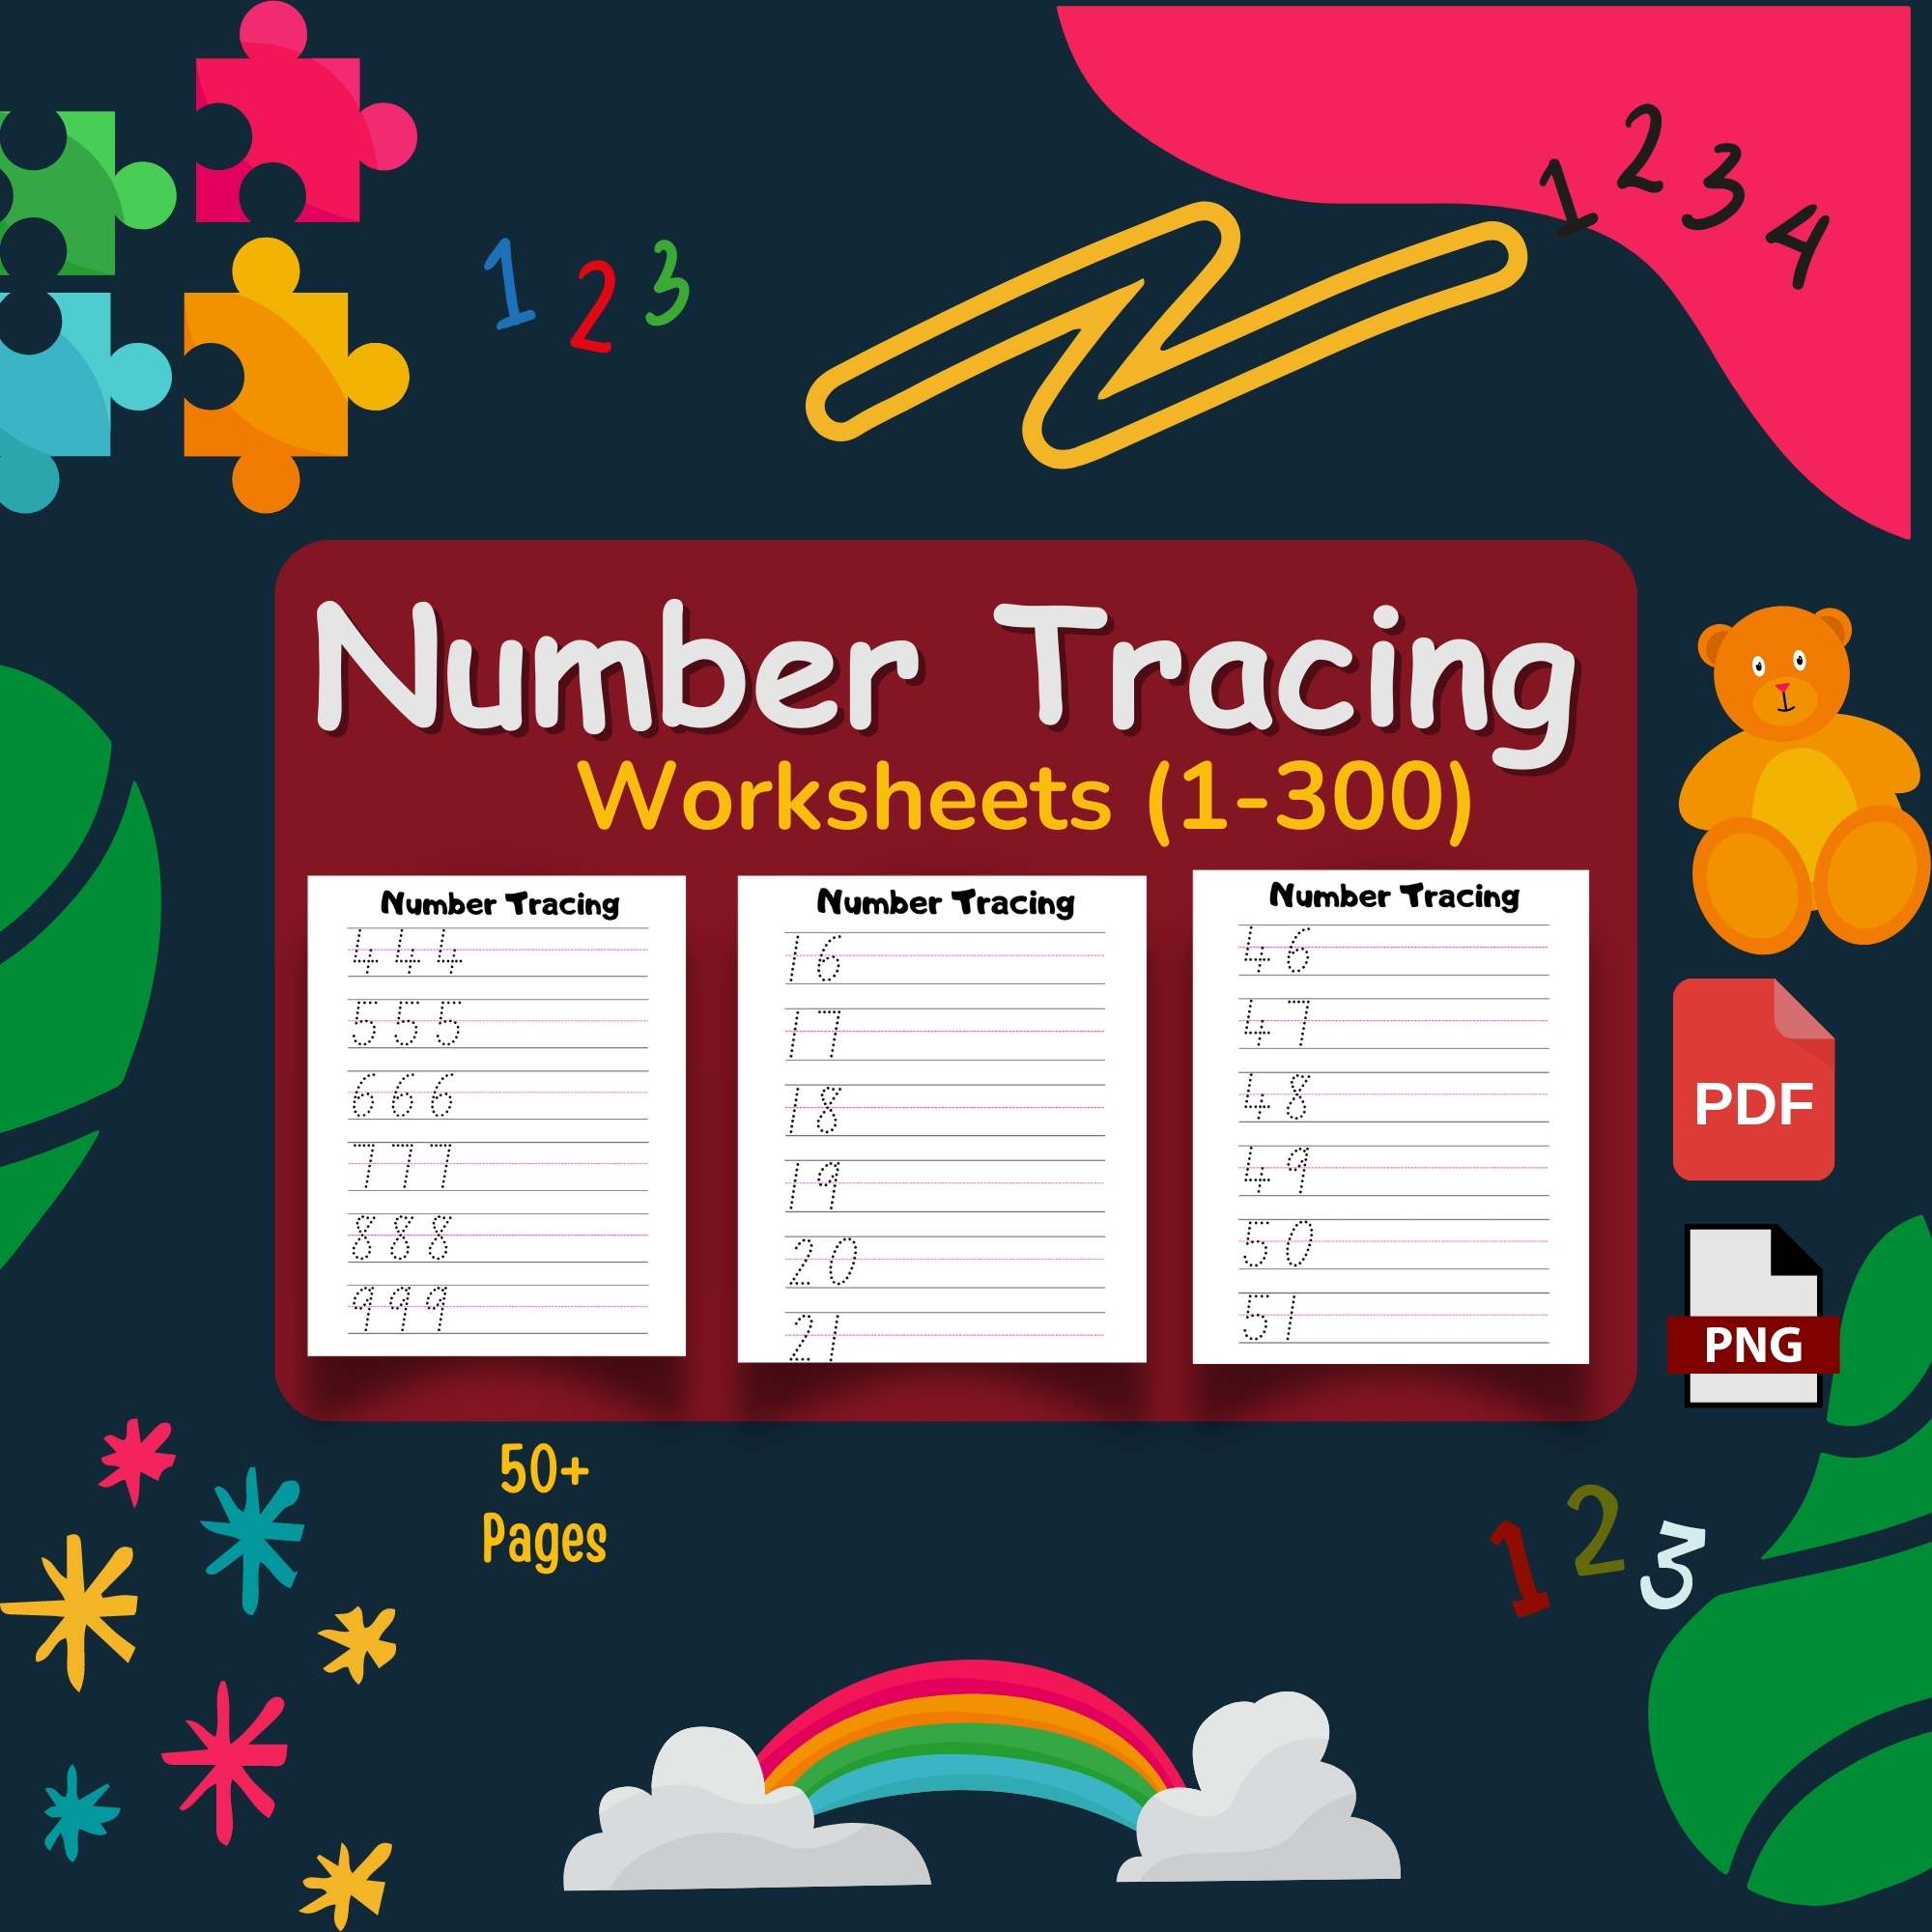 Counting 1 to 300, Math Number Trace Activities, Writing Numbers Practice cover image.